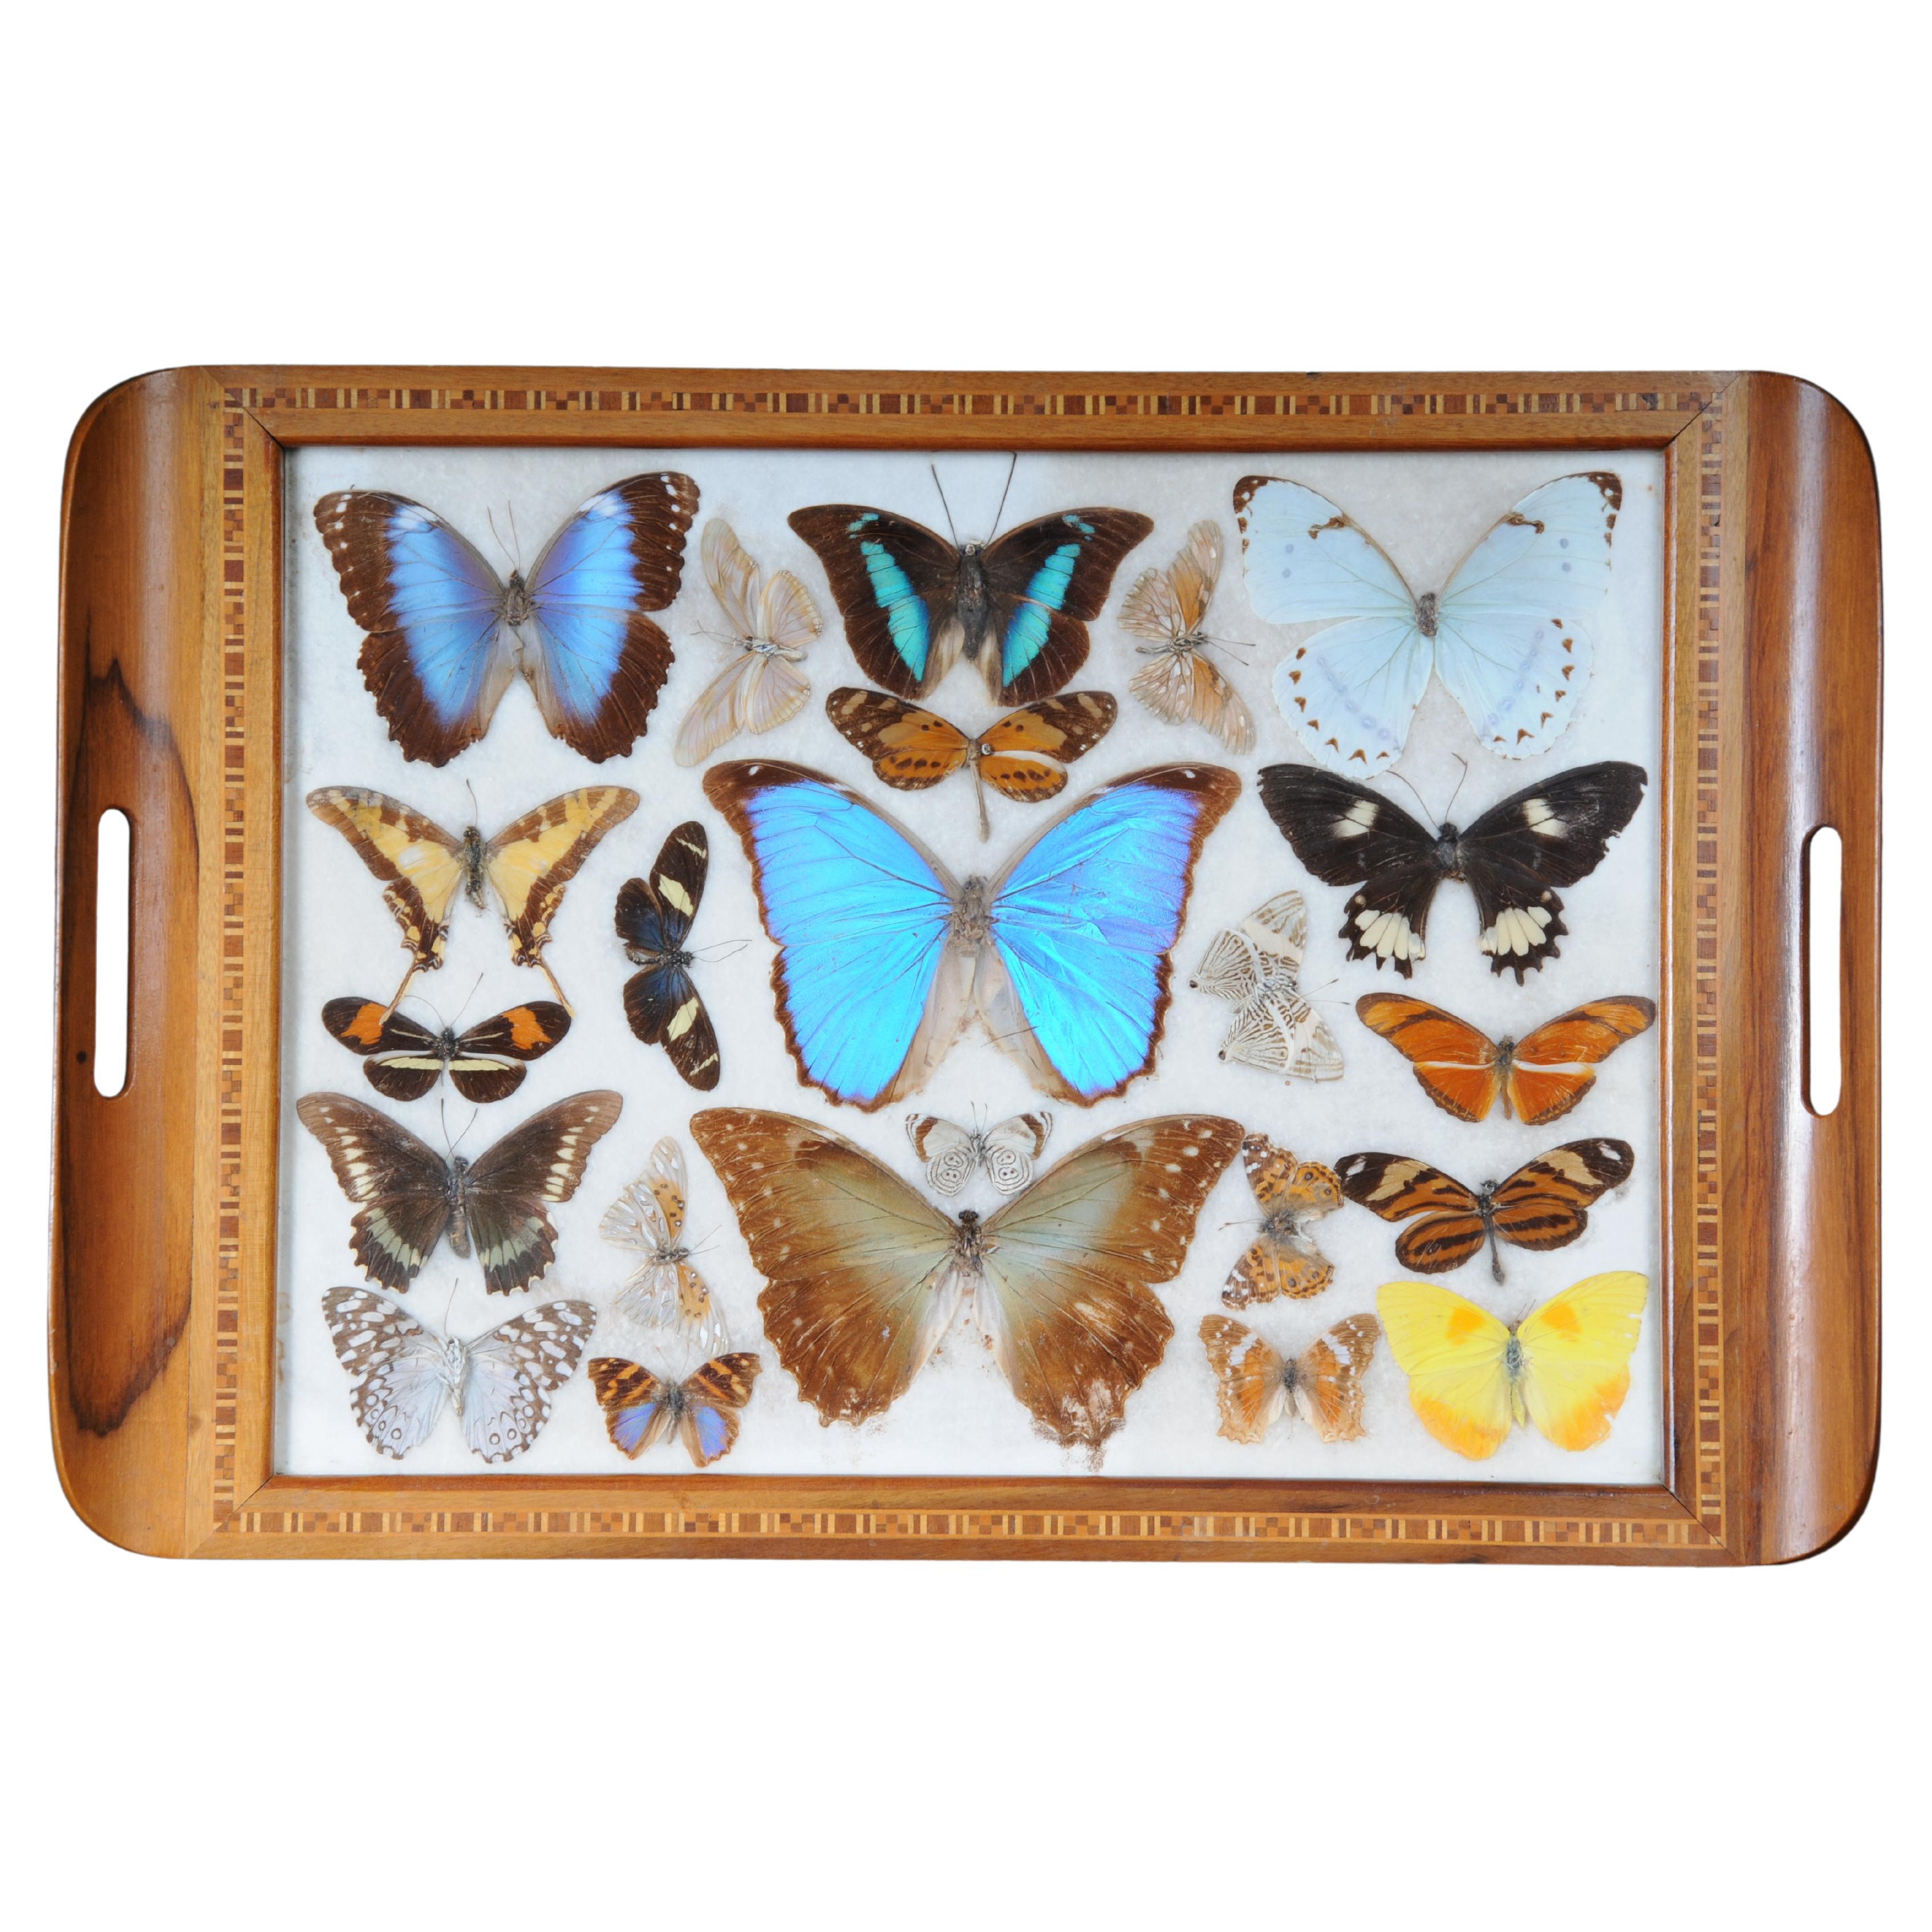 Curious antique tray with real butterfly specimens. Very rare For Sale